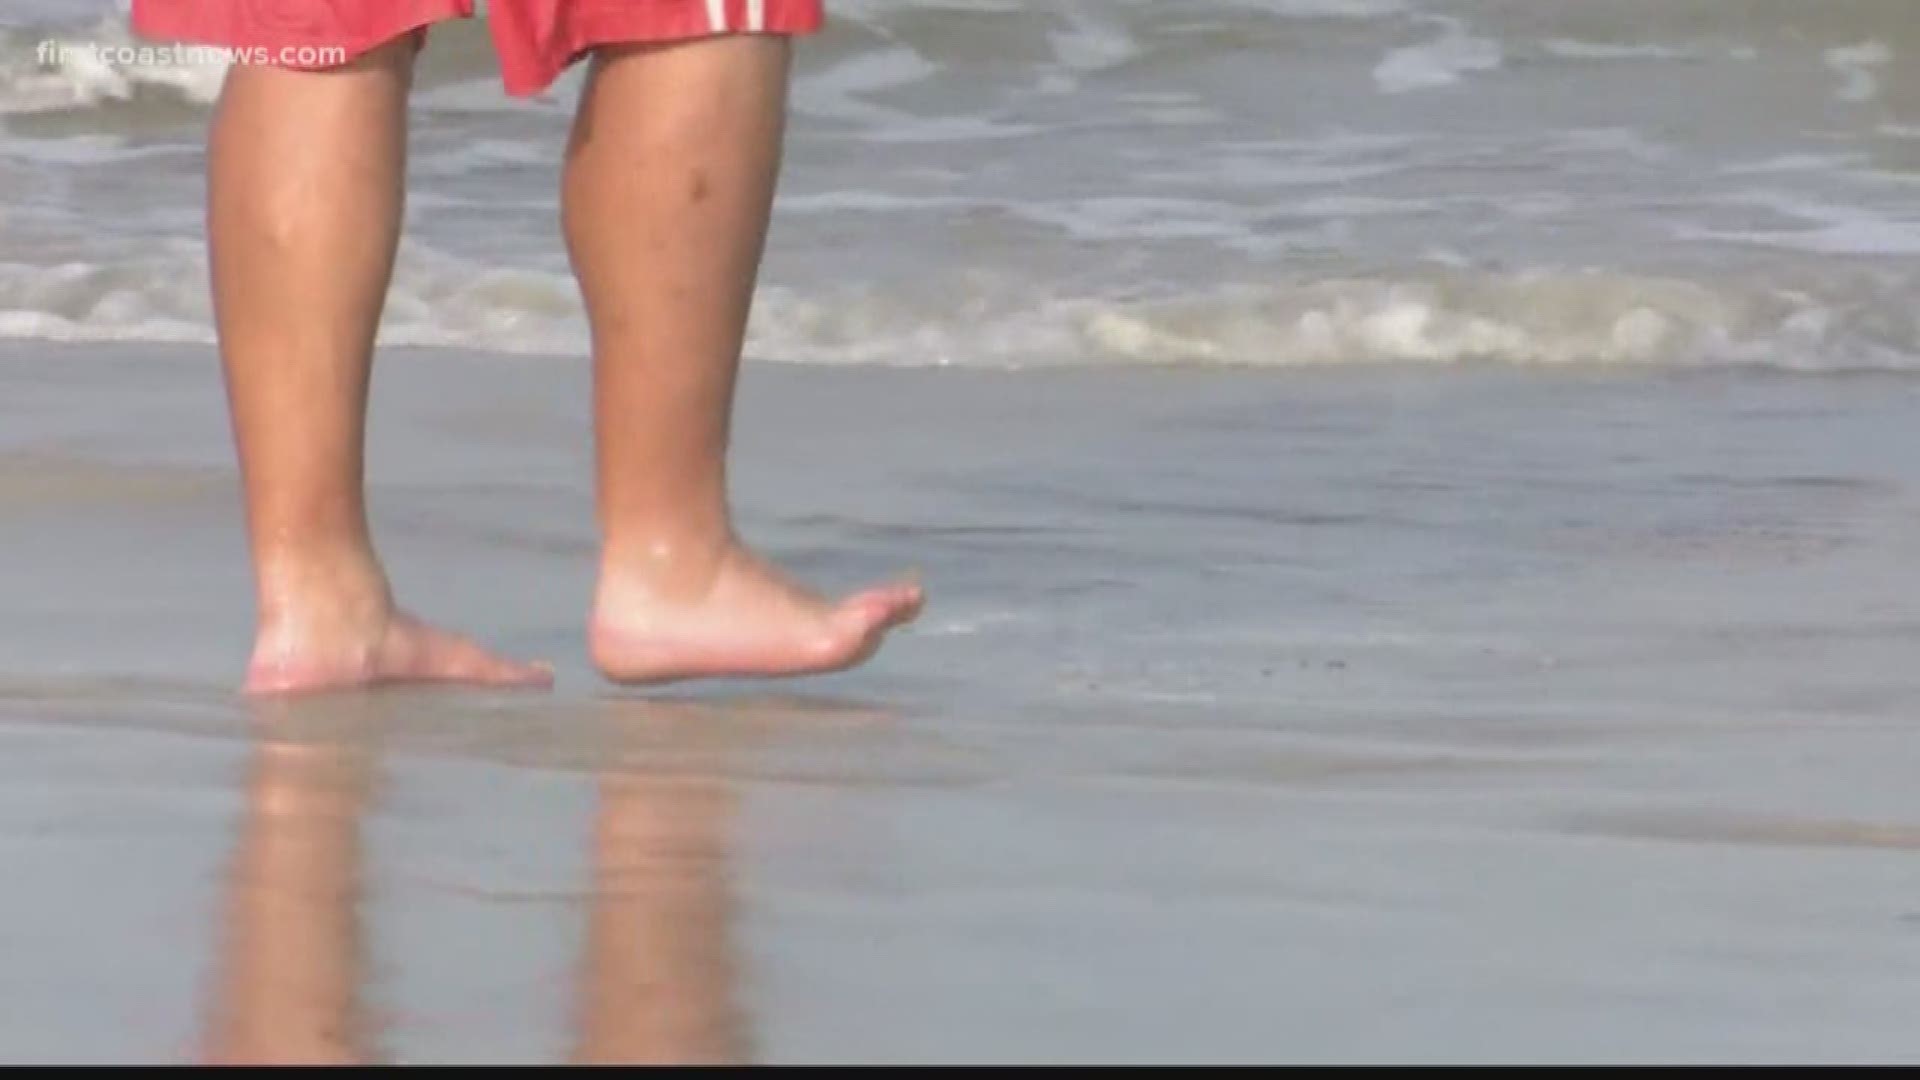 Two people, a 17-year-old boy and a 30-year-old man, were bitten by sharks in Fernandina Beach Friday afternoon.  